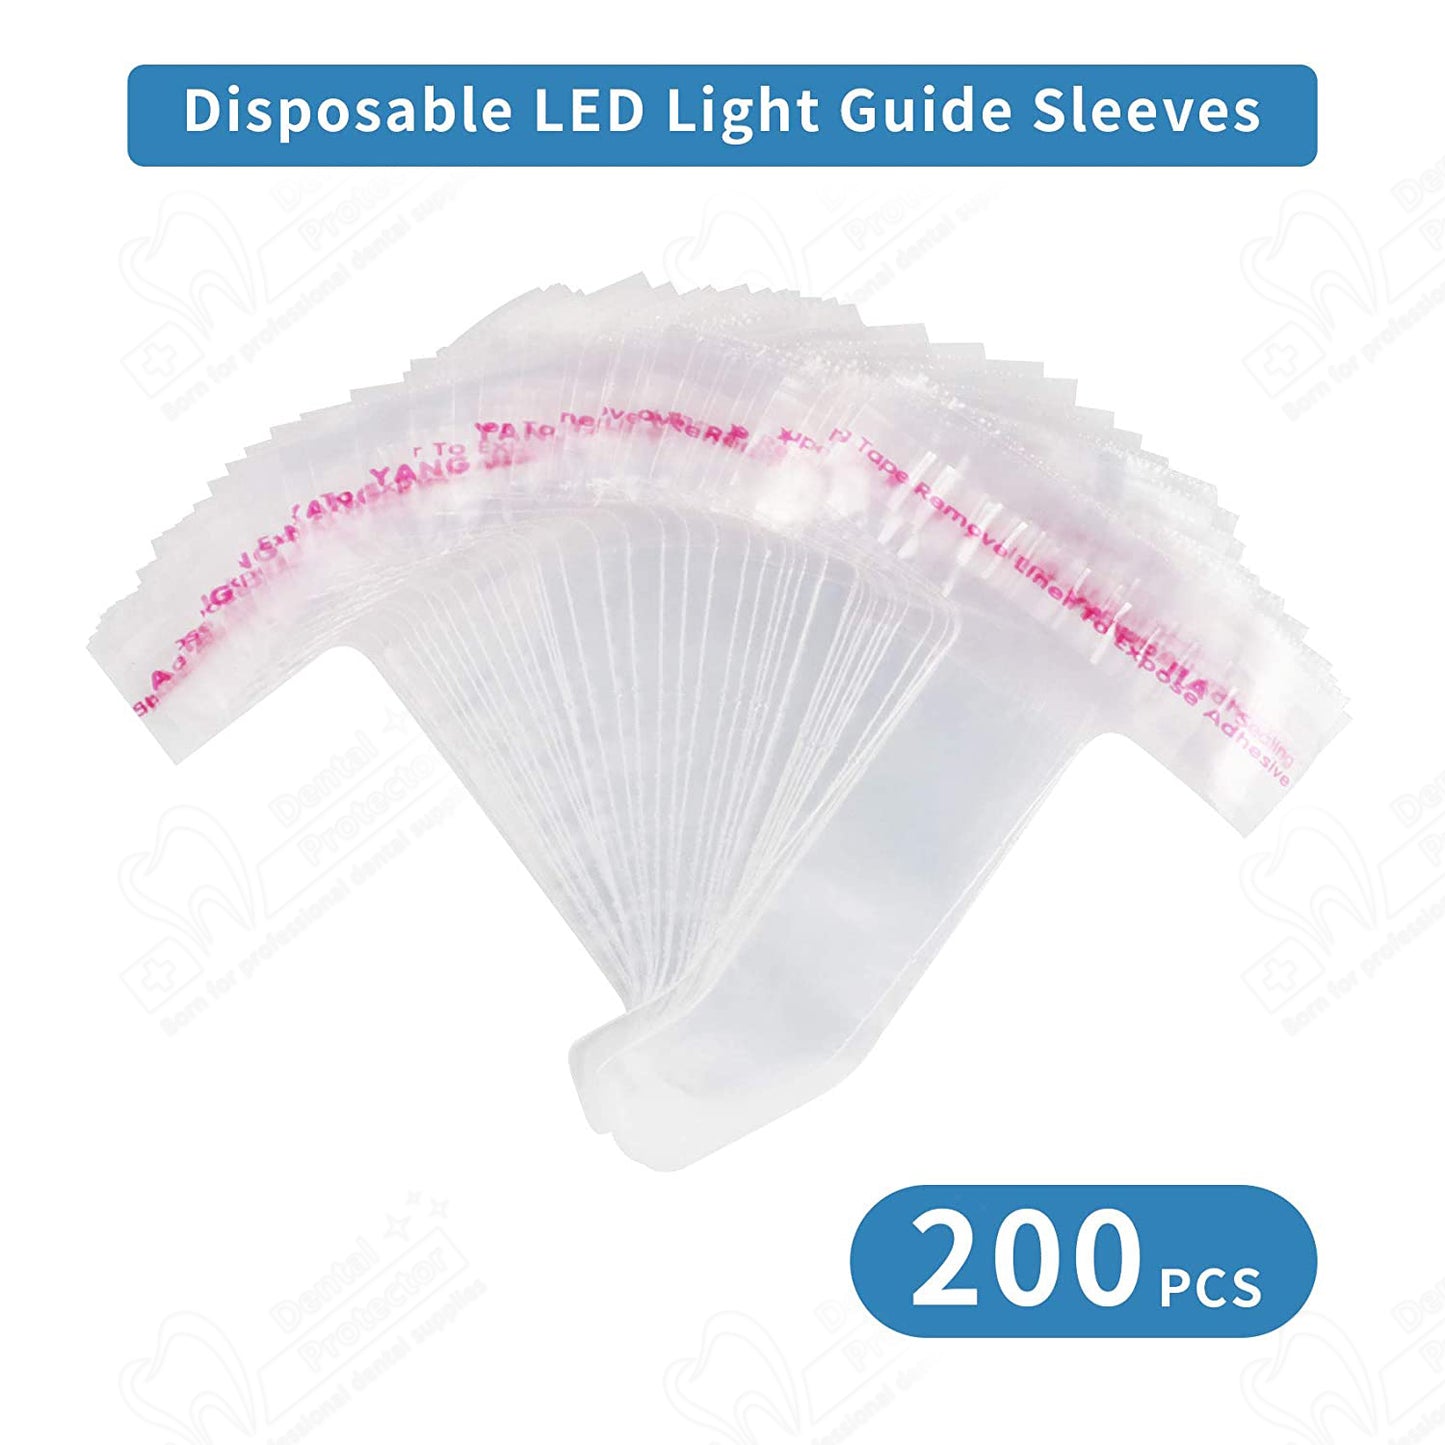 Dental Curing Light Lamp Cover Disposable LED Light Guide Sleeves 200PCS, Implant Protective Cure Covers for Curing Tips - Plastic Optic & Transparent Sheet